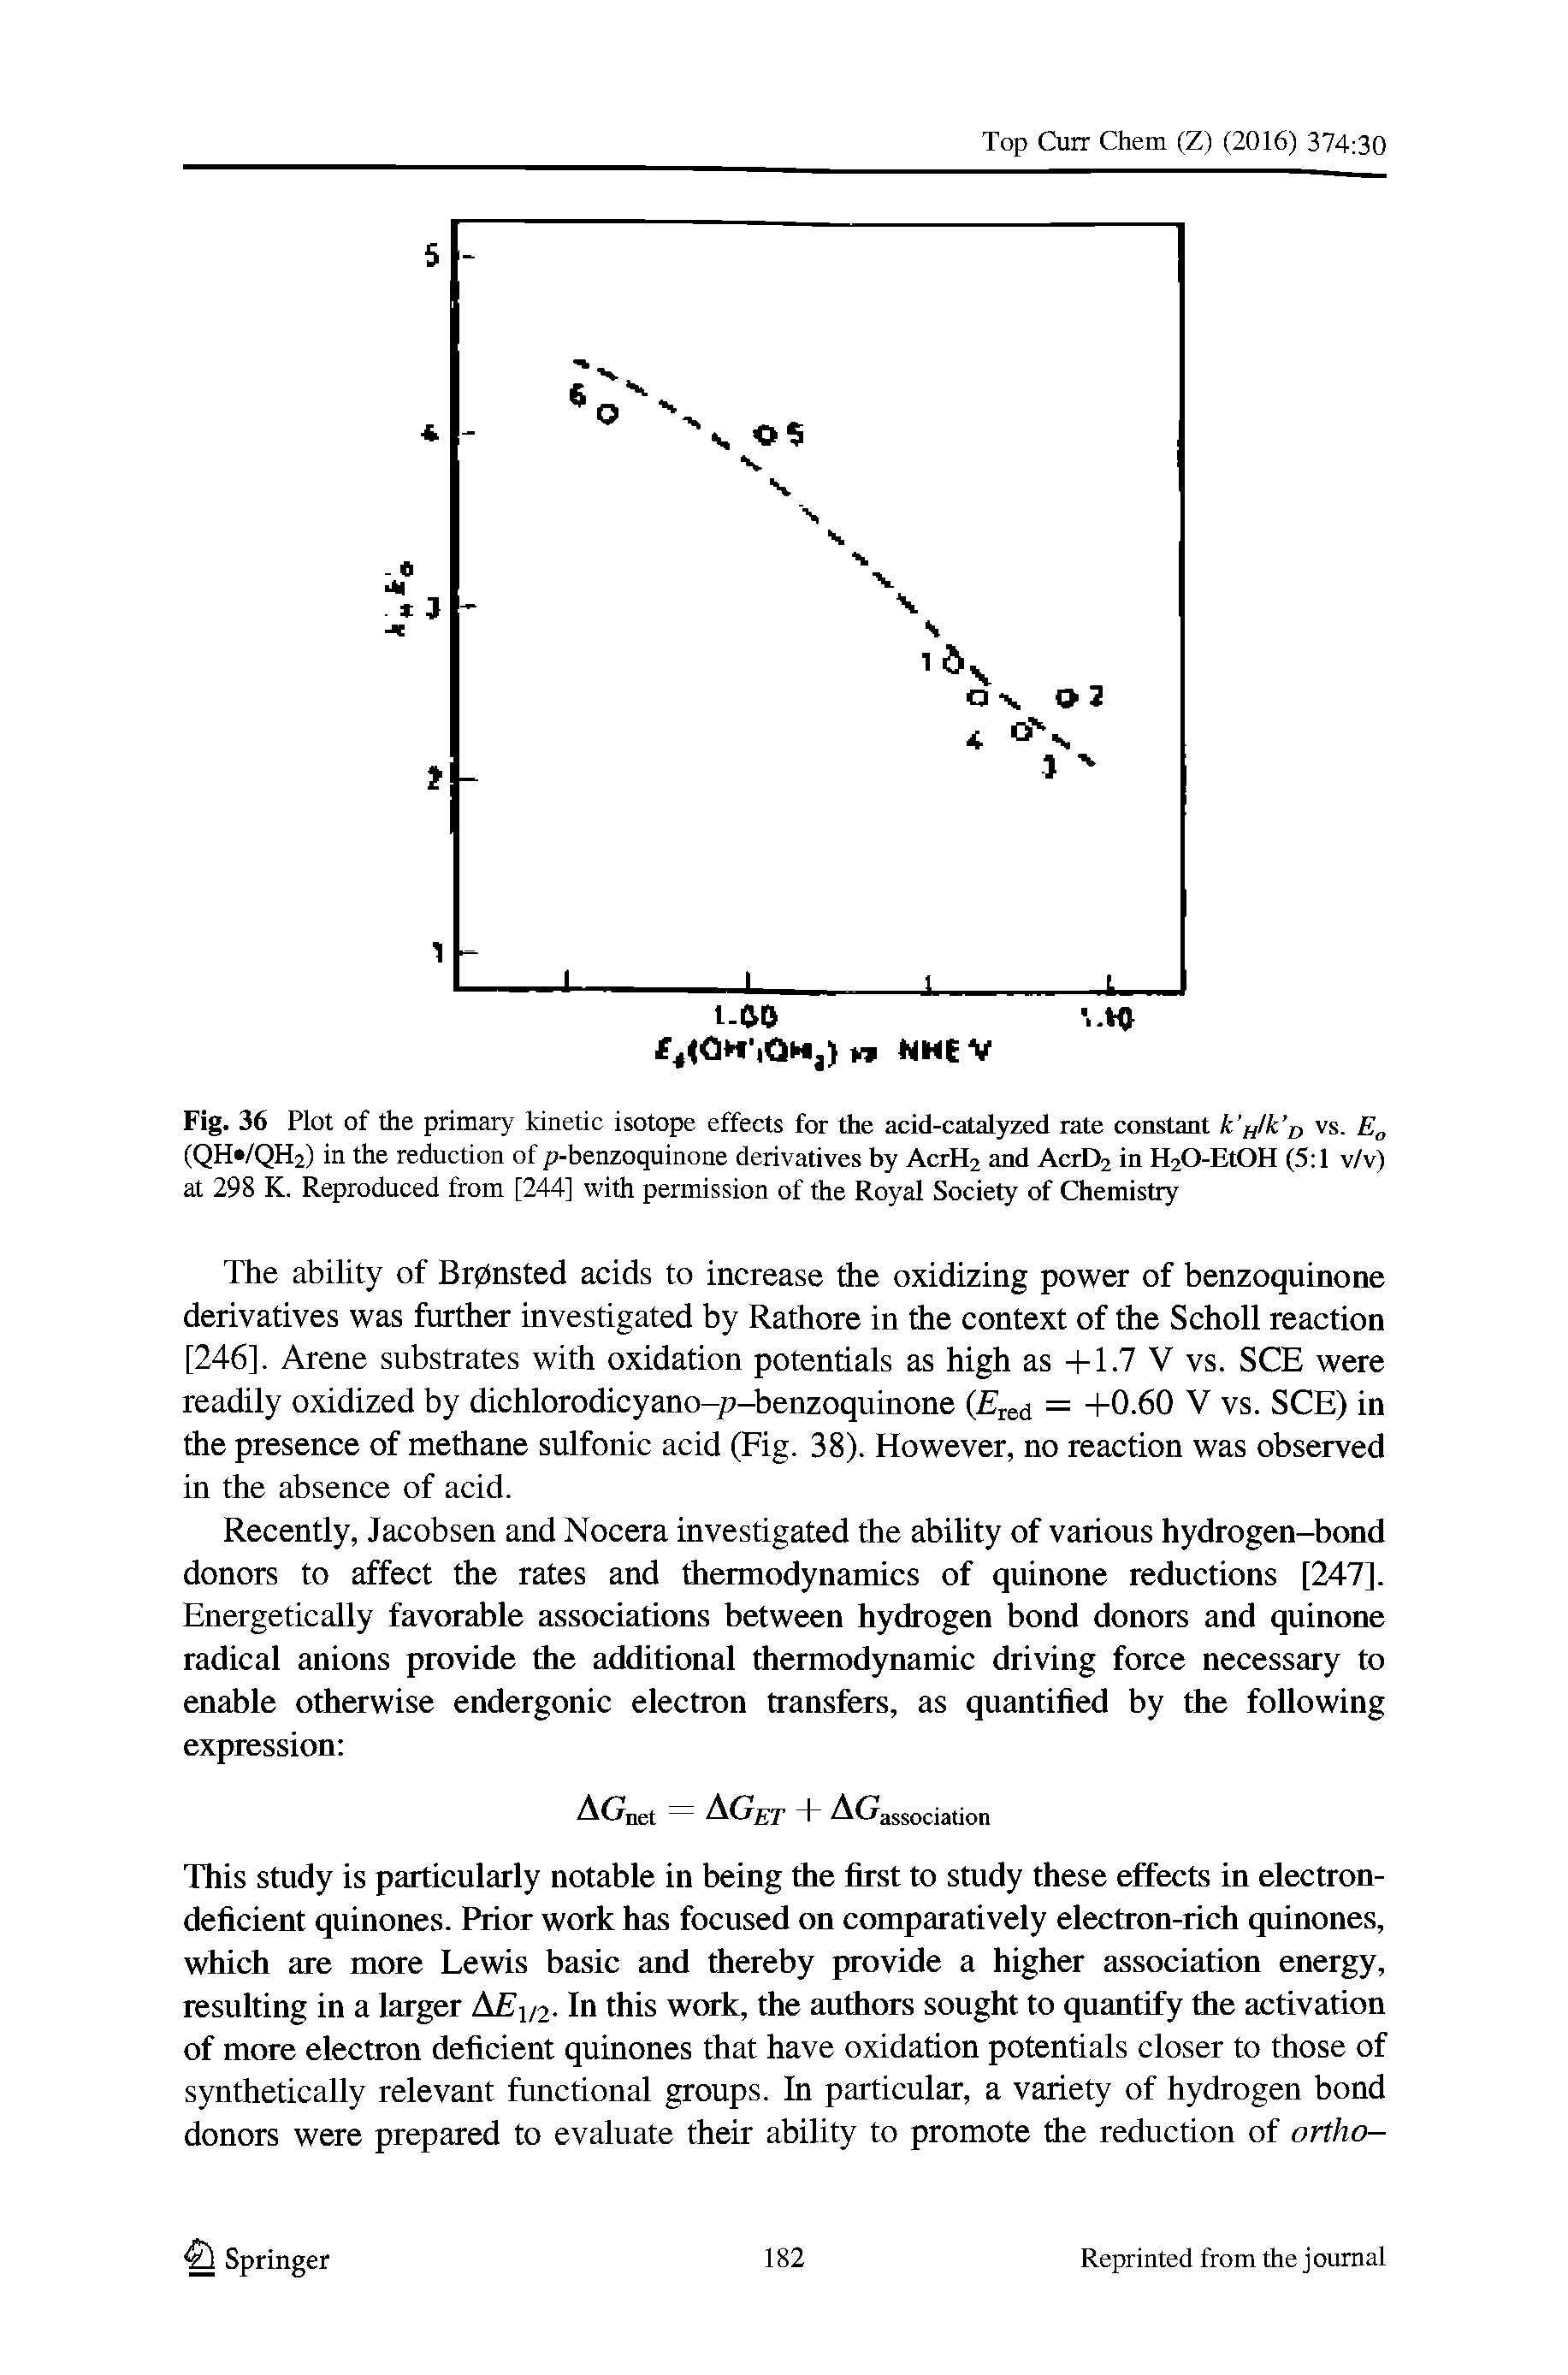 Fig. 36 Plot of the primary kinetic isotope effects for the acid-catalyzed rate constant k ulk i, vs. E (QH /QH2) in the reduction of p-benzoquinone derivatives by ActH2 and ActD2 in H20-Et0H (5 1 v/v) at 298 K. Reproduced from [244] with permission of the Royal Society of Chemistry...